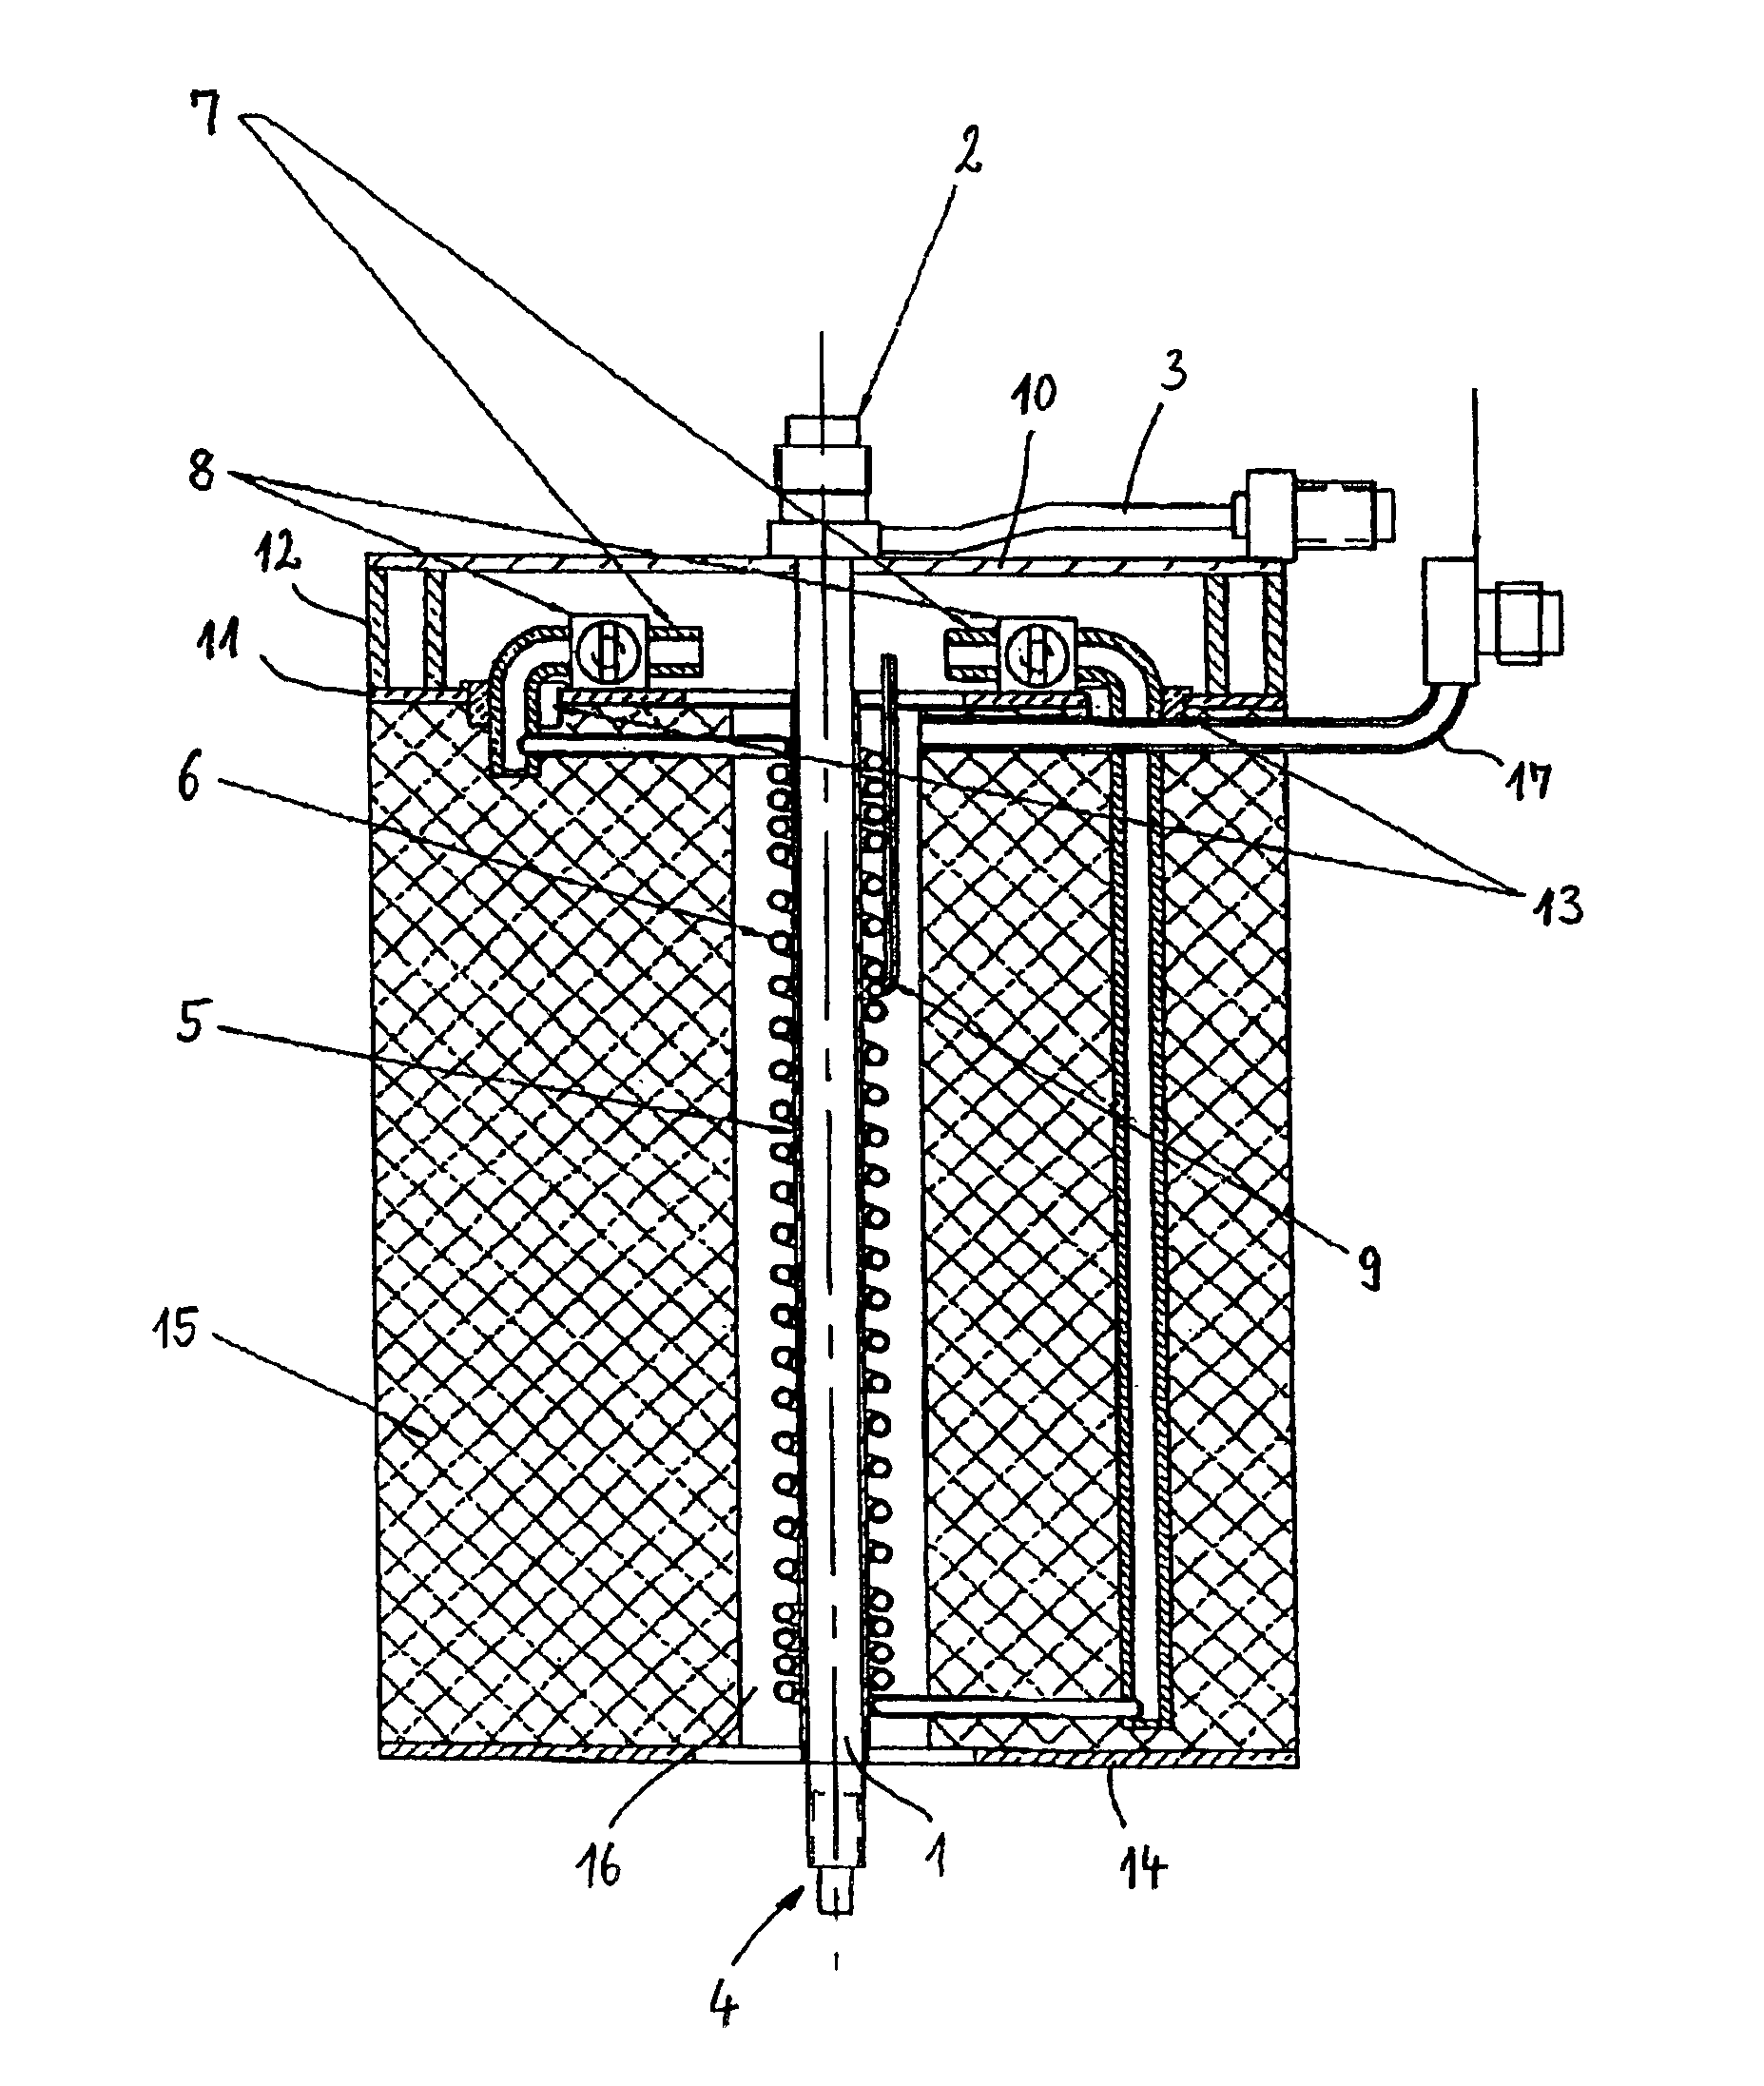 Temperature-controlled injector for a chemical analysis unit